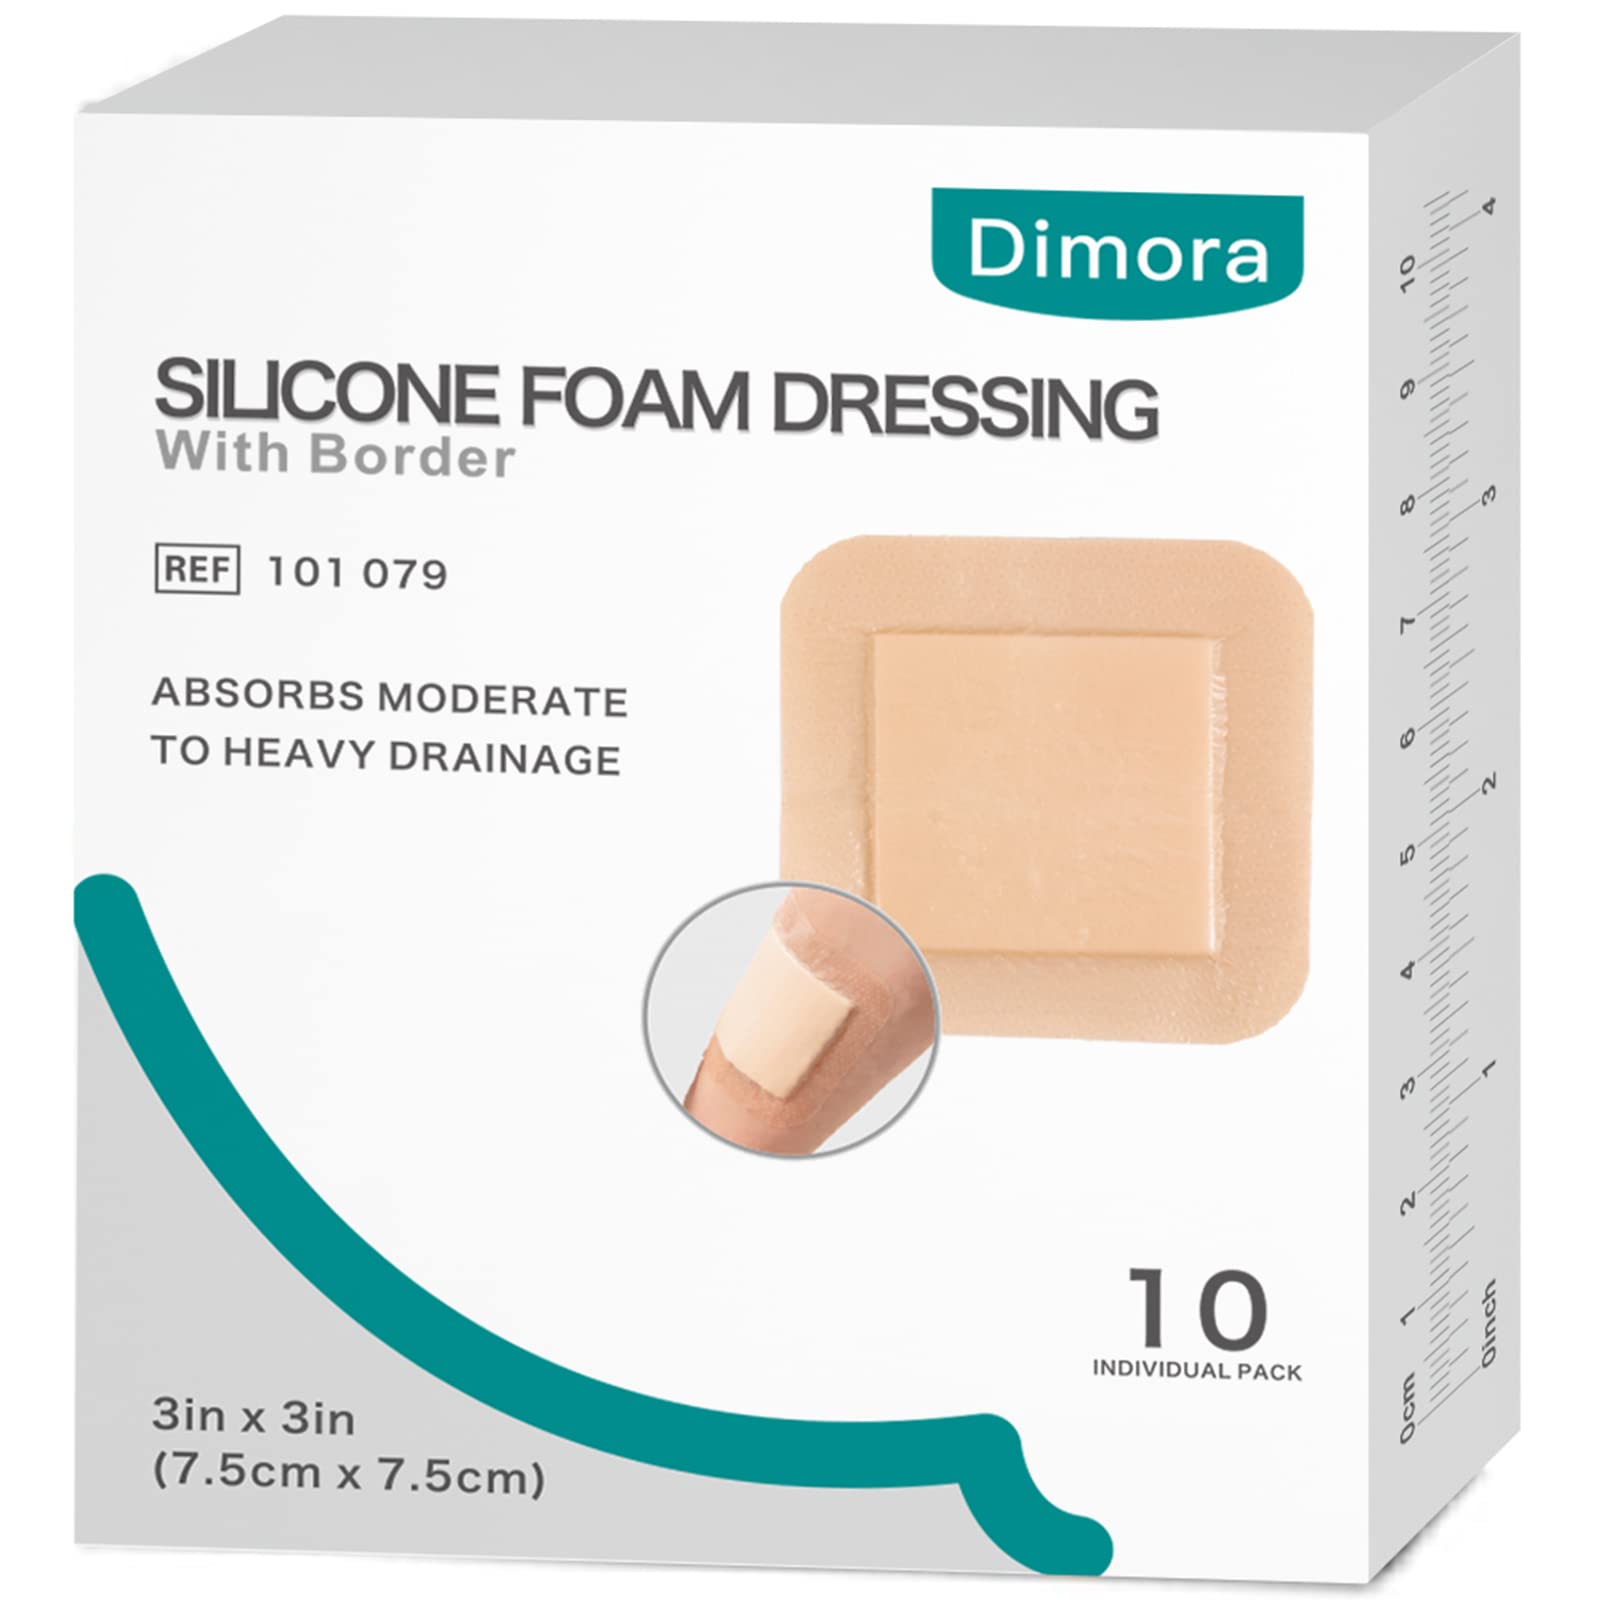 Dimora Silicone Foam Dressing with Border Adhesive Waterproof Wound Dr